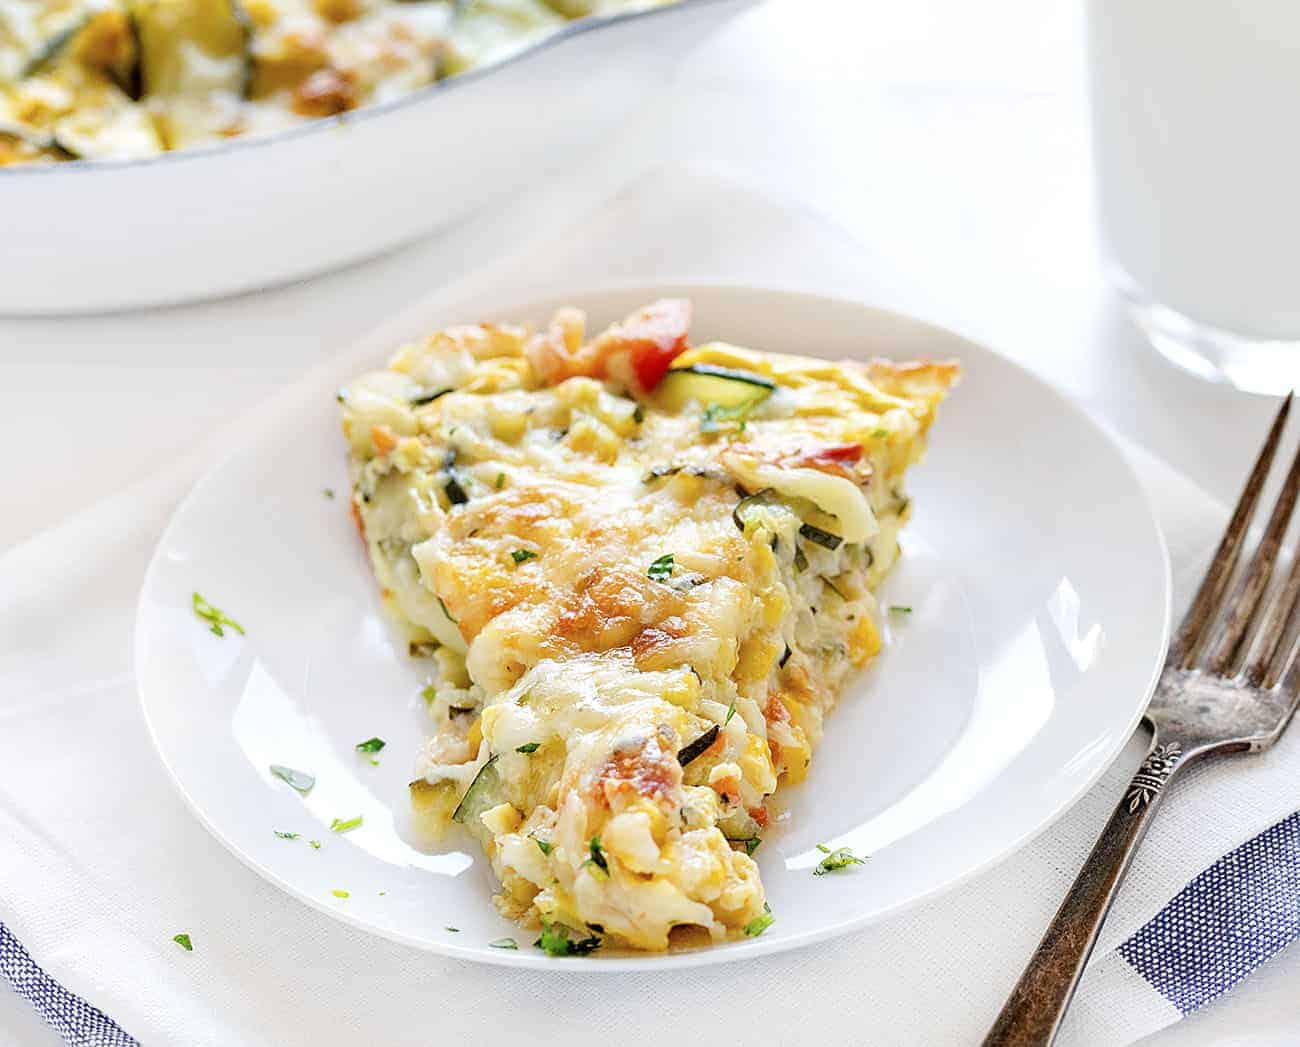 One Piece of Zucchini and Corn Quiche on a Plate